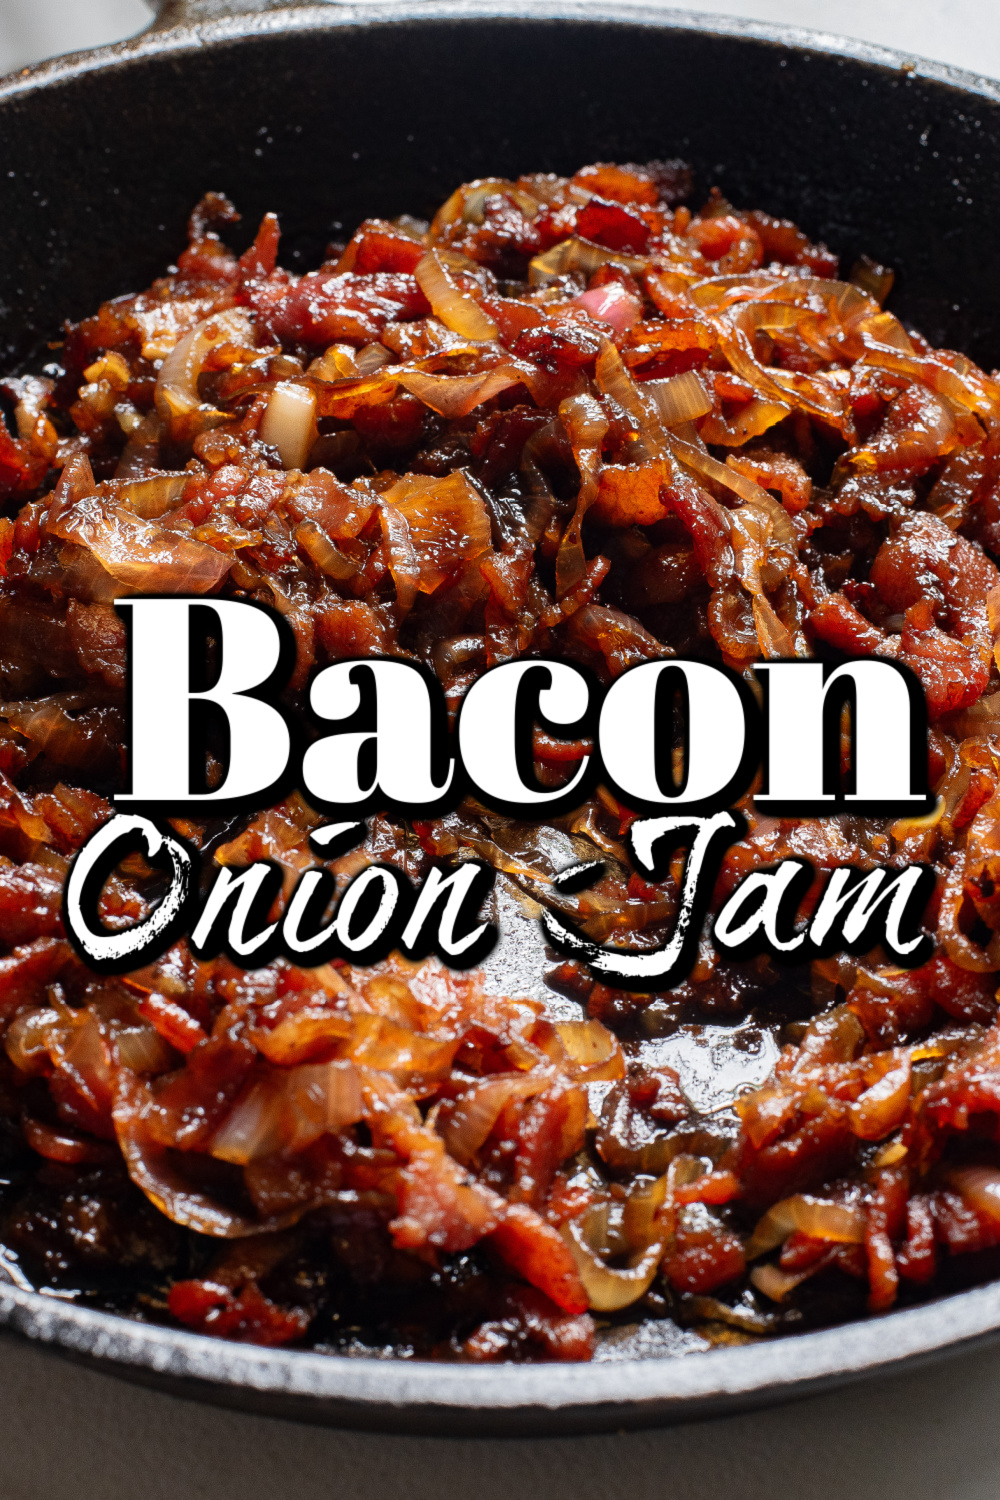 This Bacon Onion Jam recipe will rock your world! It's super easy to make and pairs perfectly with burgers or sandwiches!